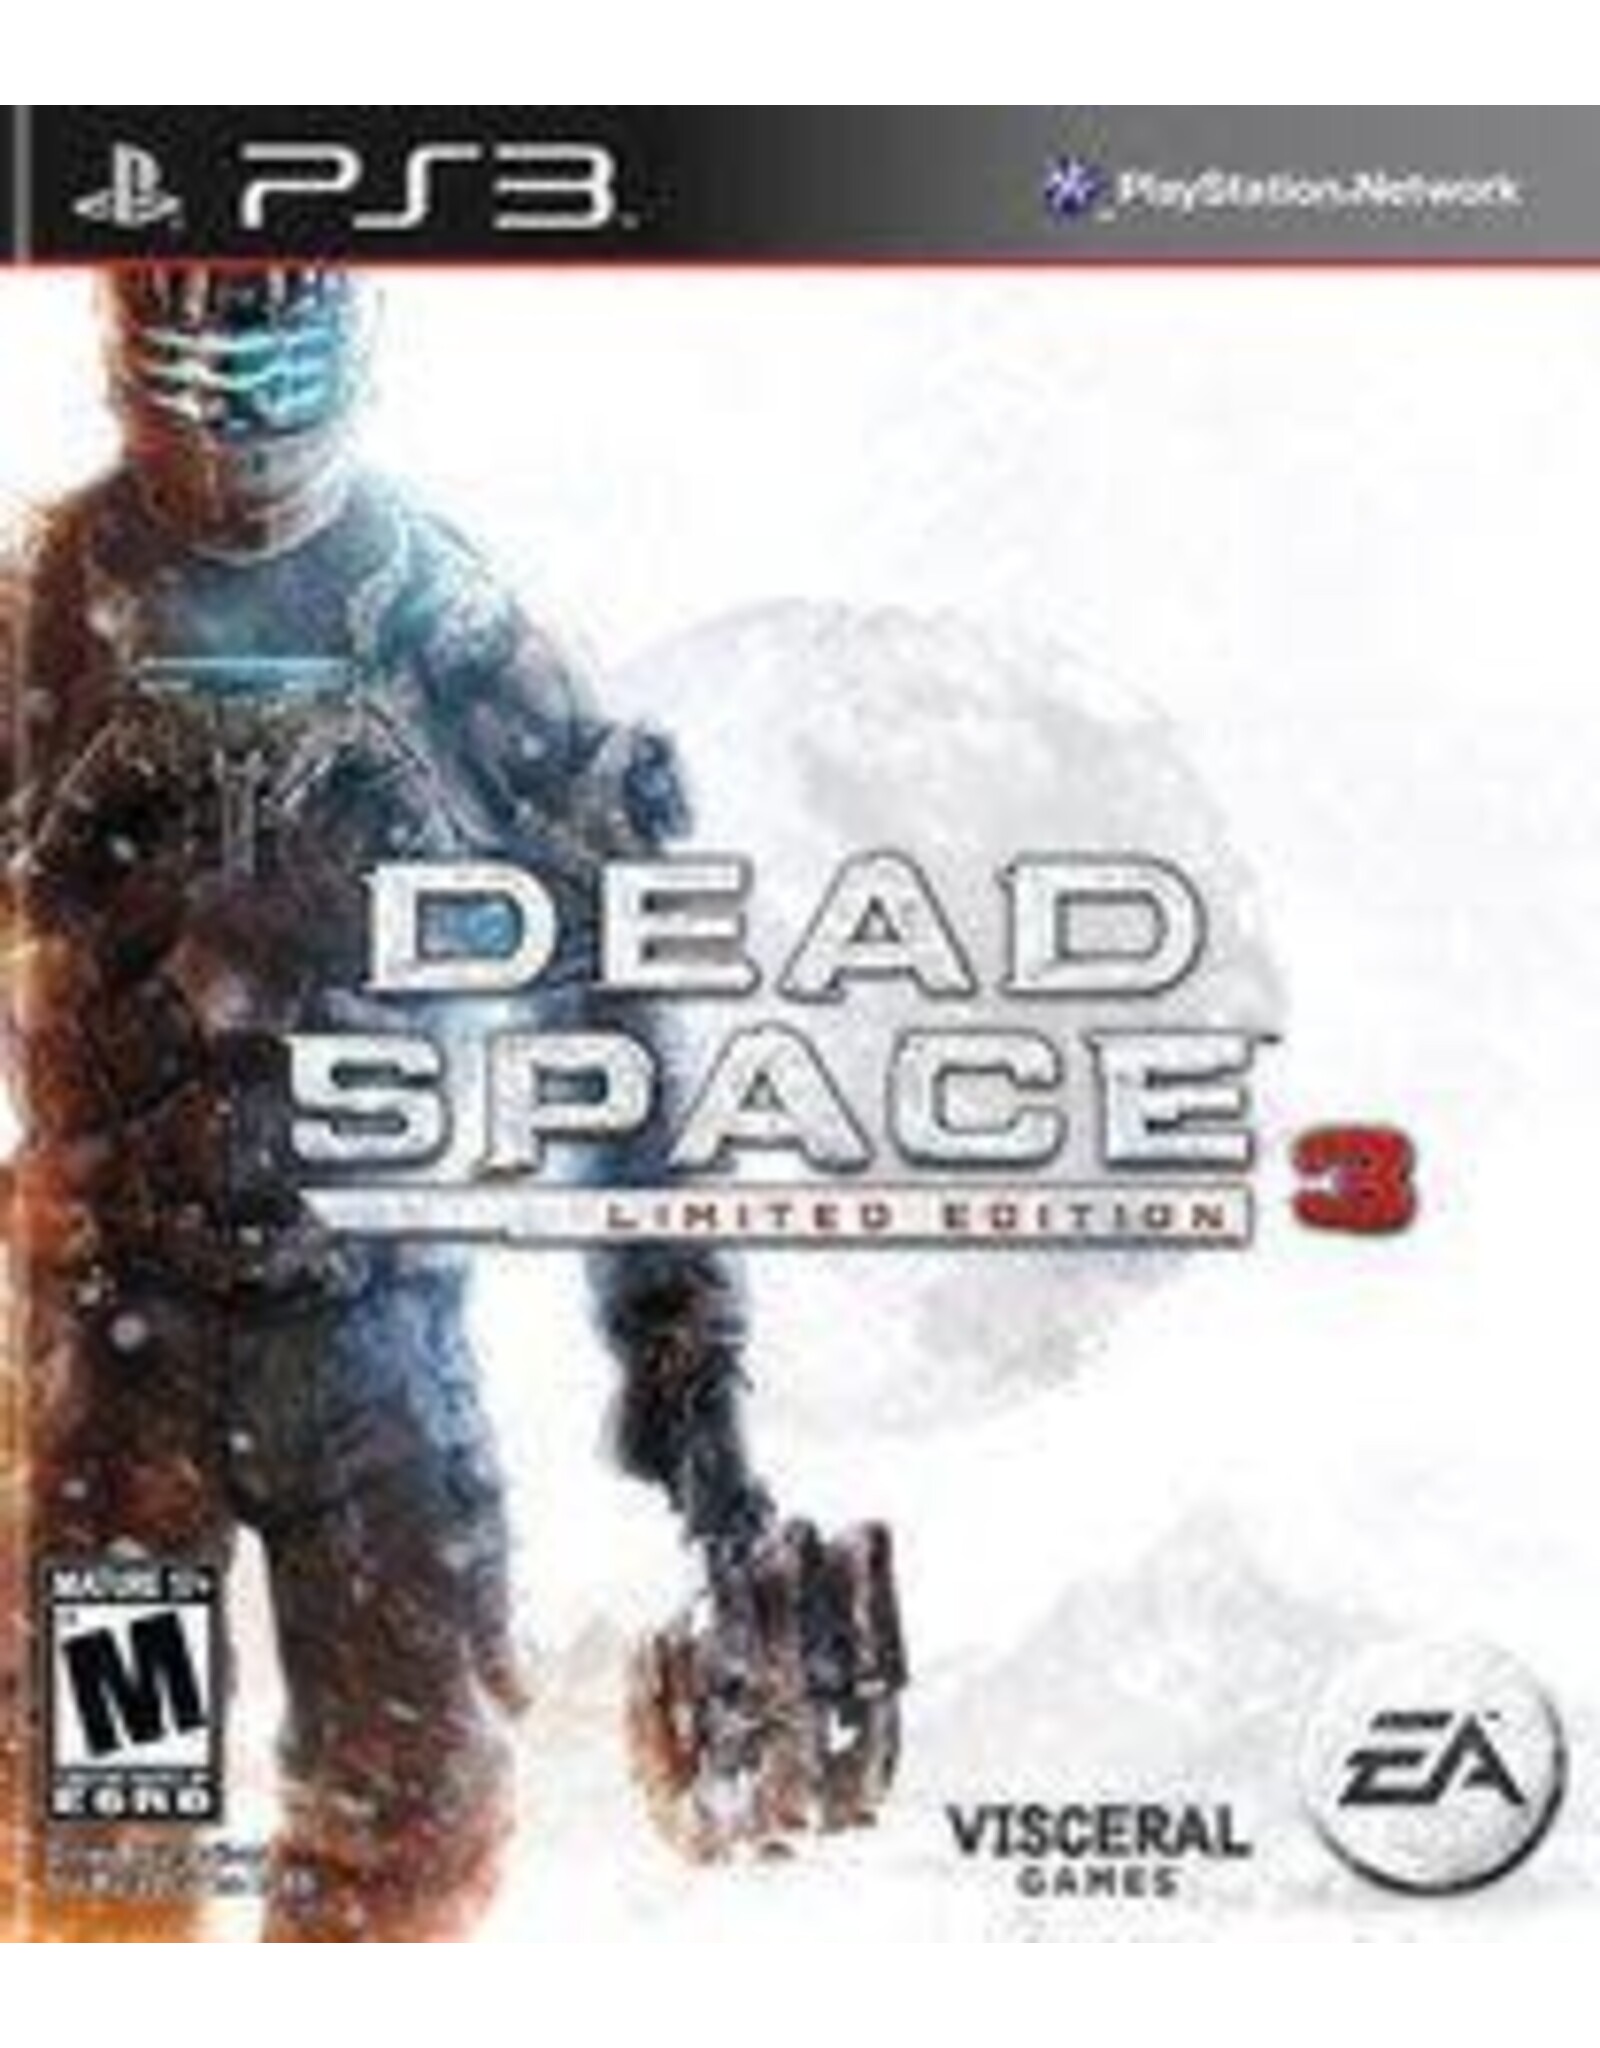 Playstation 3 Dead Space 3 Limited Edition (Used)